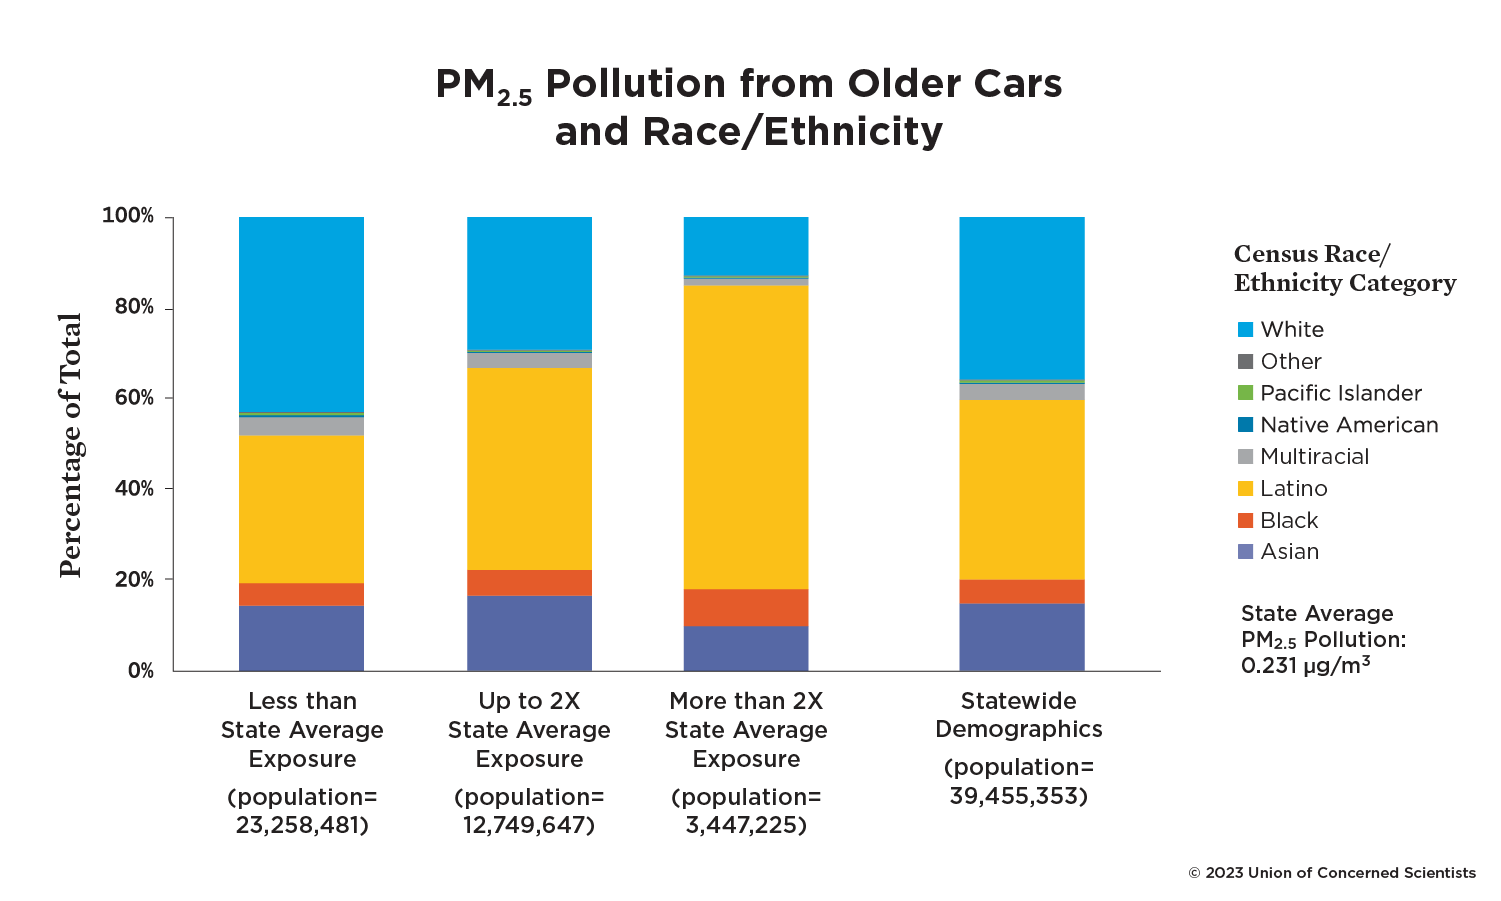 Figure showing  pm 2.5 pollution from older cars and race/ethnicity in California